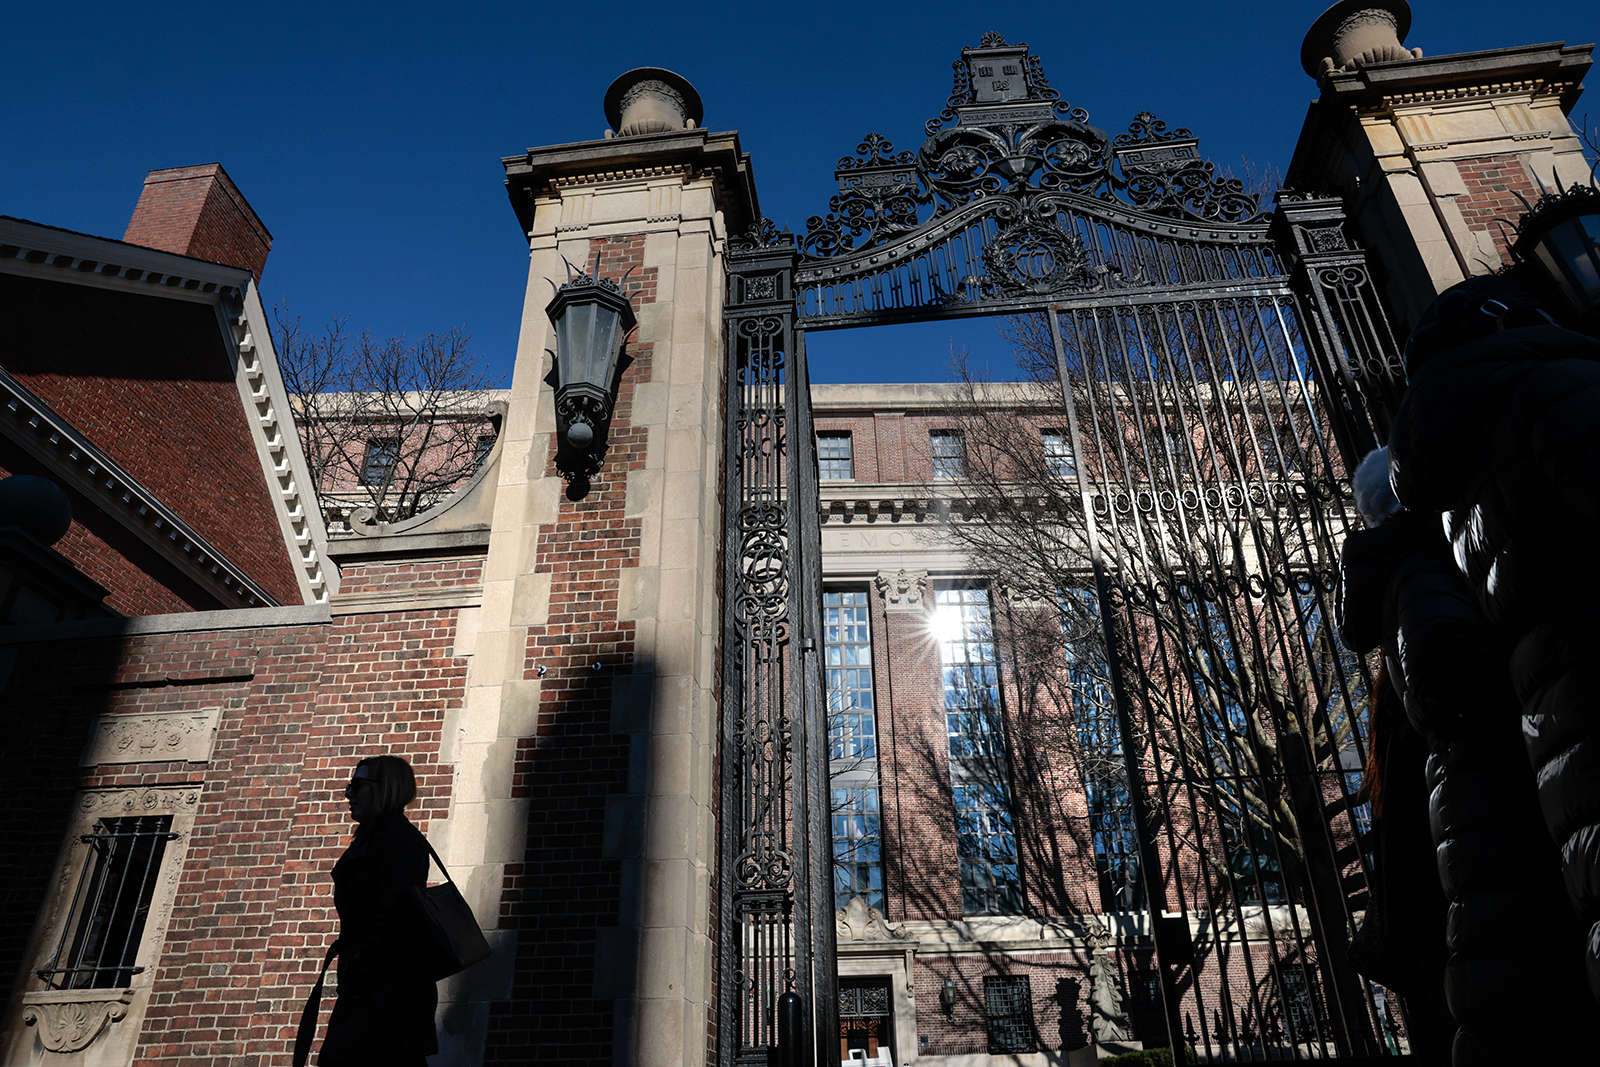 A pedestrian passes a gate to Harvard Yard on Massachusetts Ave. in Cambridge, MA, on December 12.